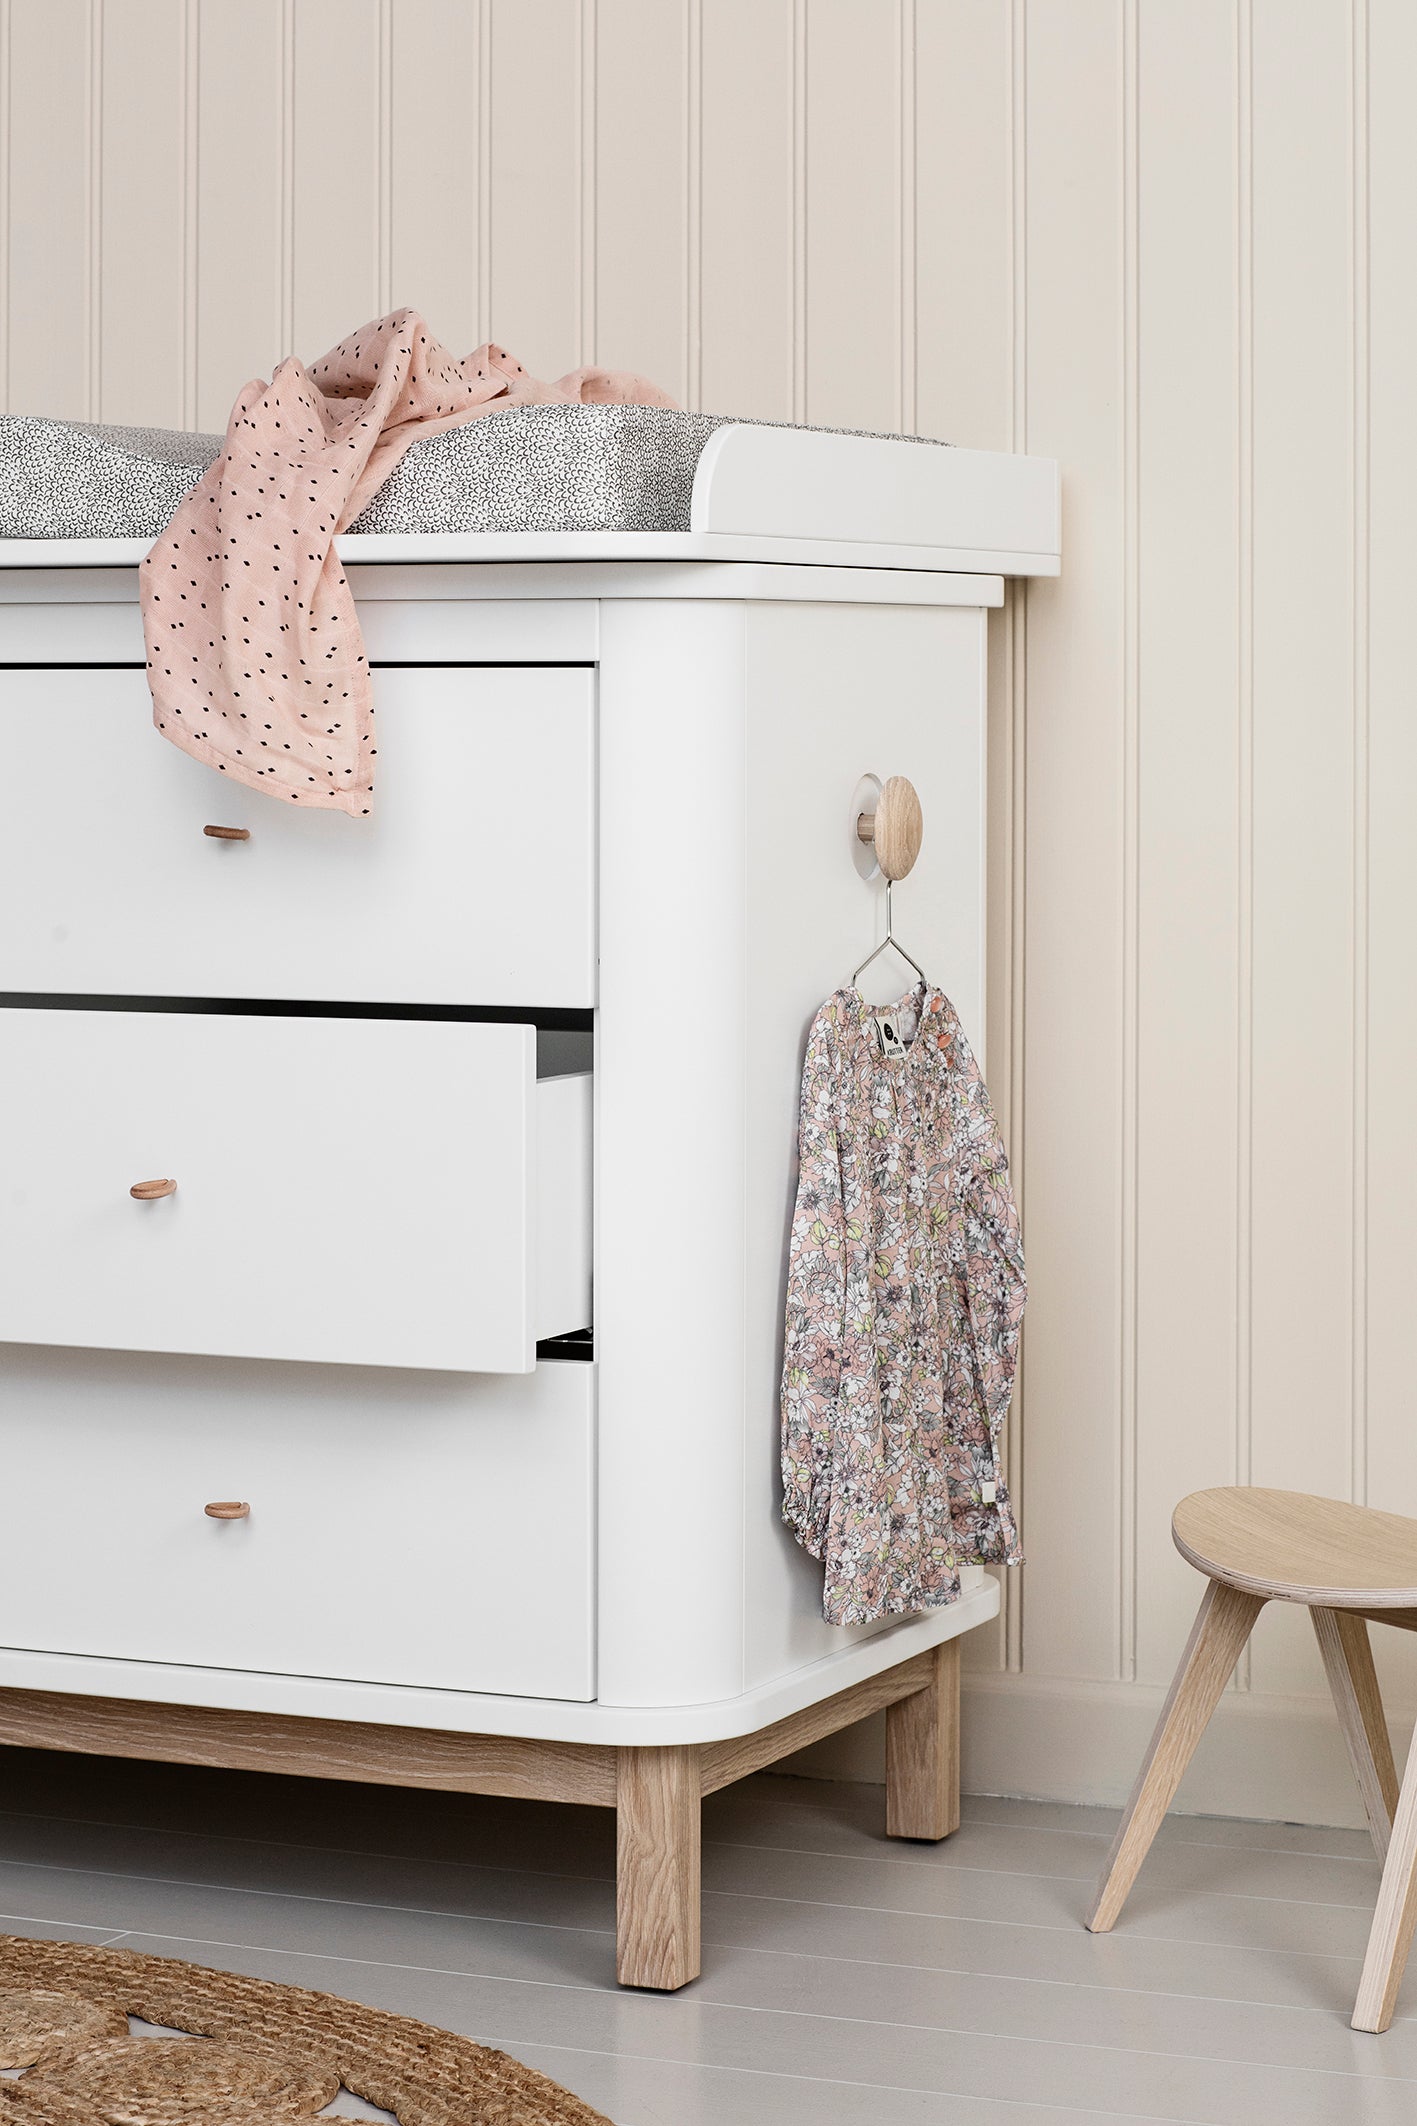 Wood Chest of 6 Drawers with Large Changing Table, Wood and White